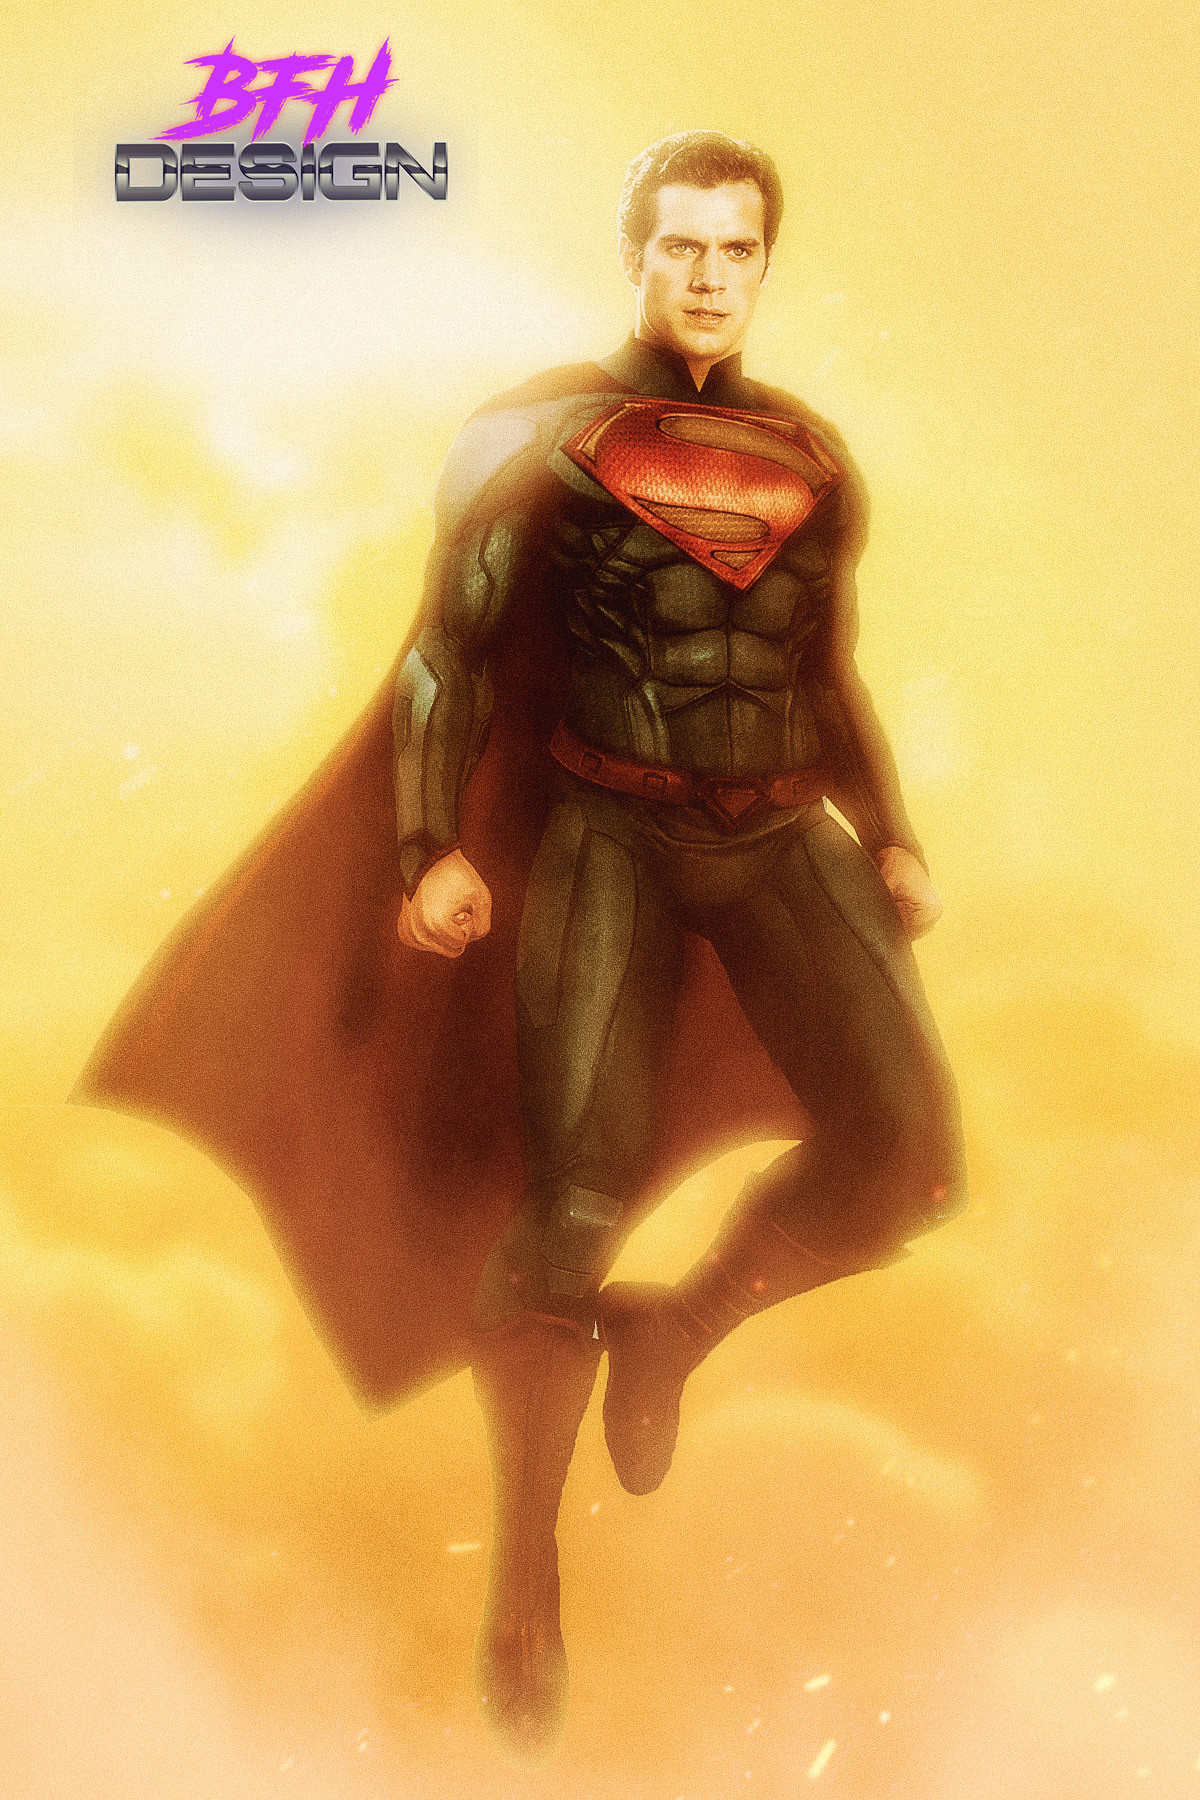 henry cavil in new 52 suit.